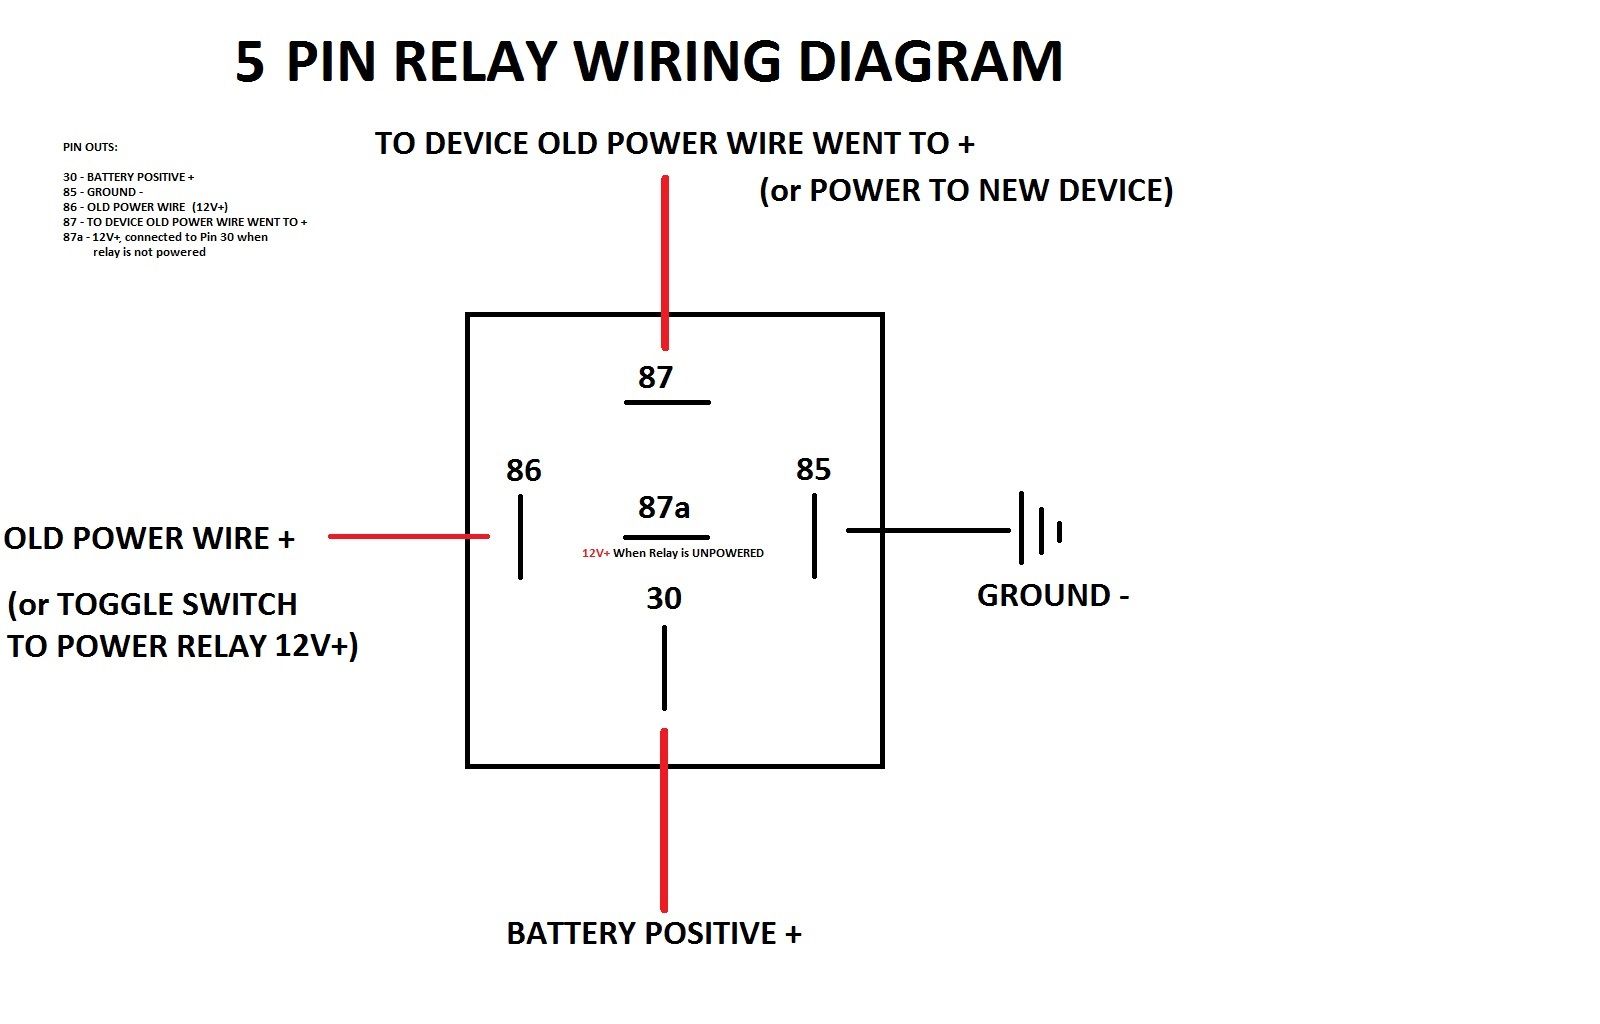 5 Pin Relay Wiring Diagram from www.dsmtuners.com